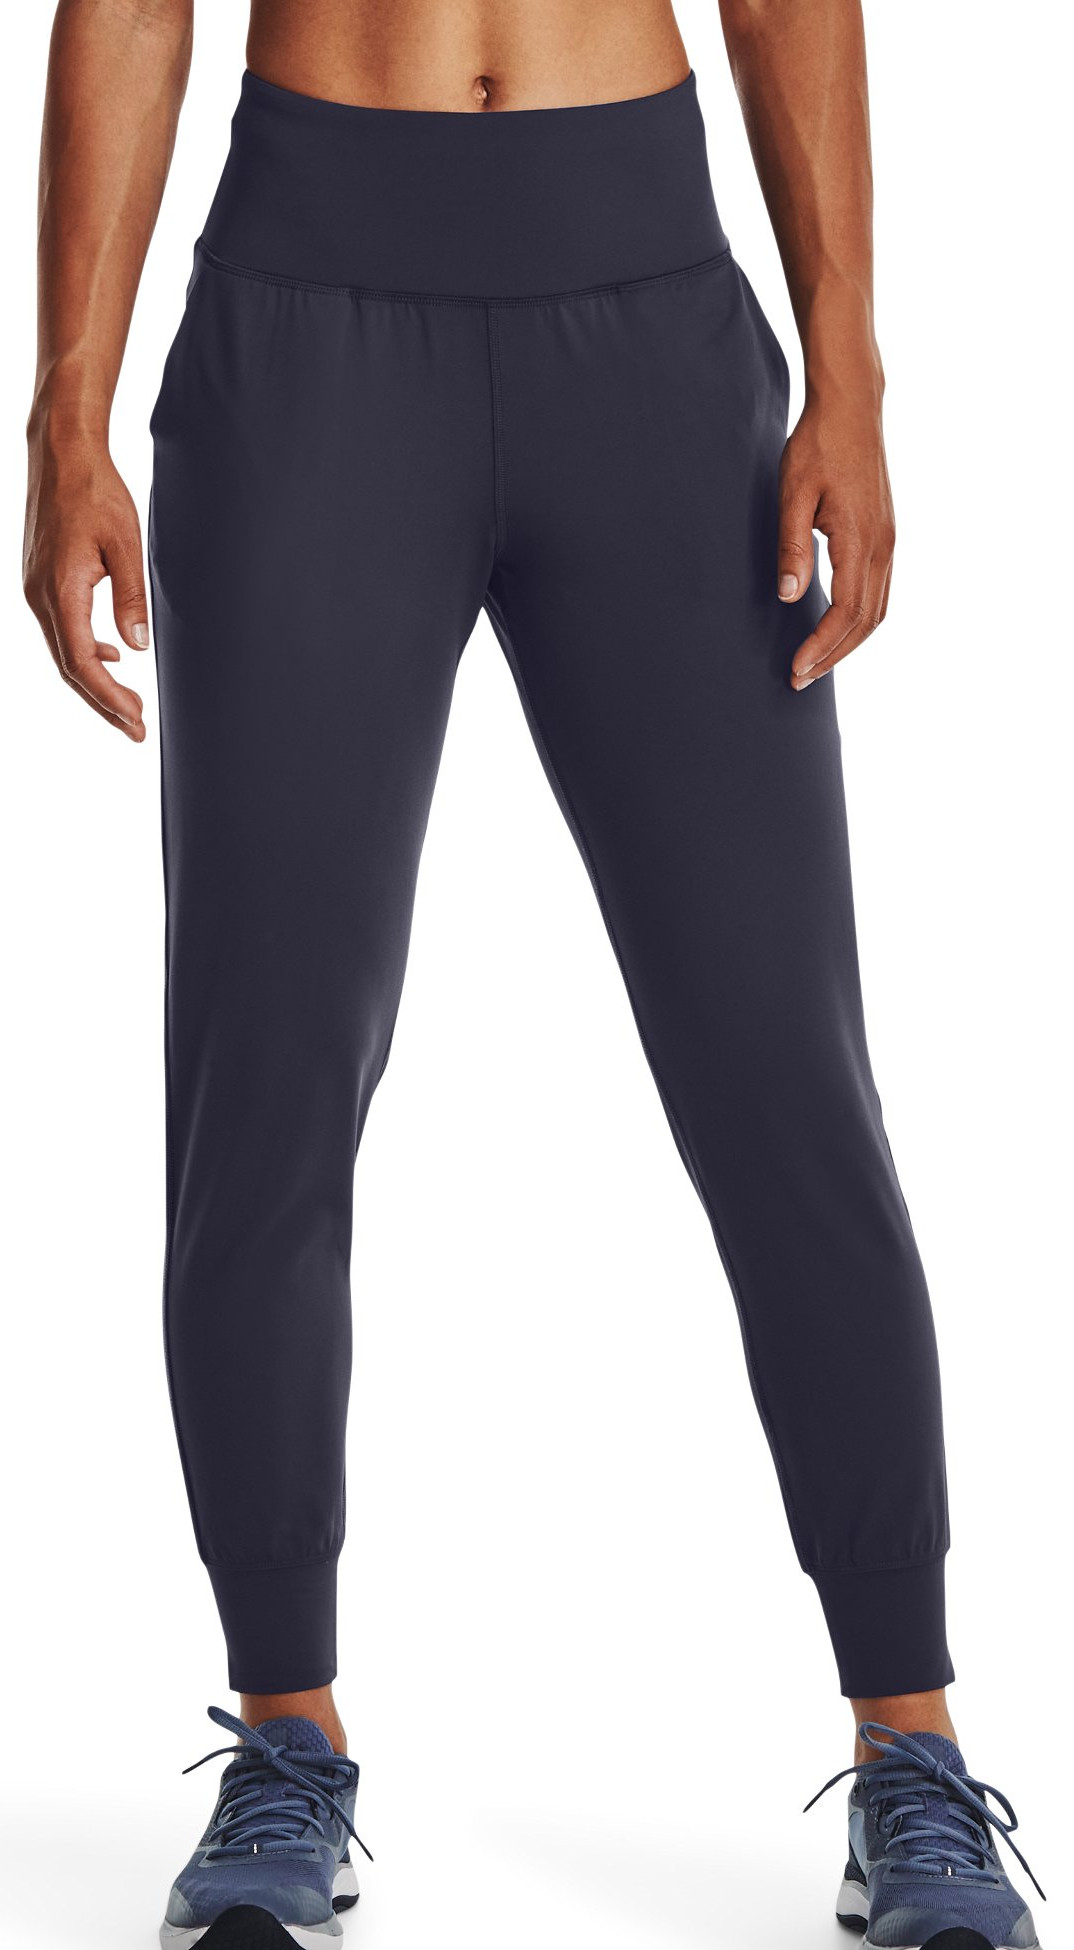 Leggings Under Armour Meridian Jogger-GRY